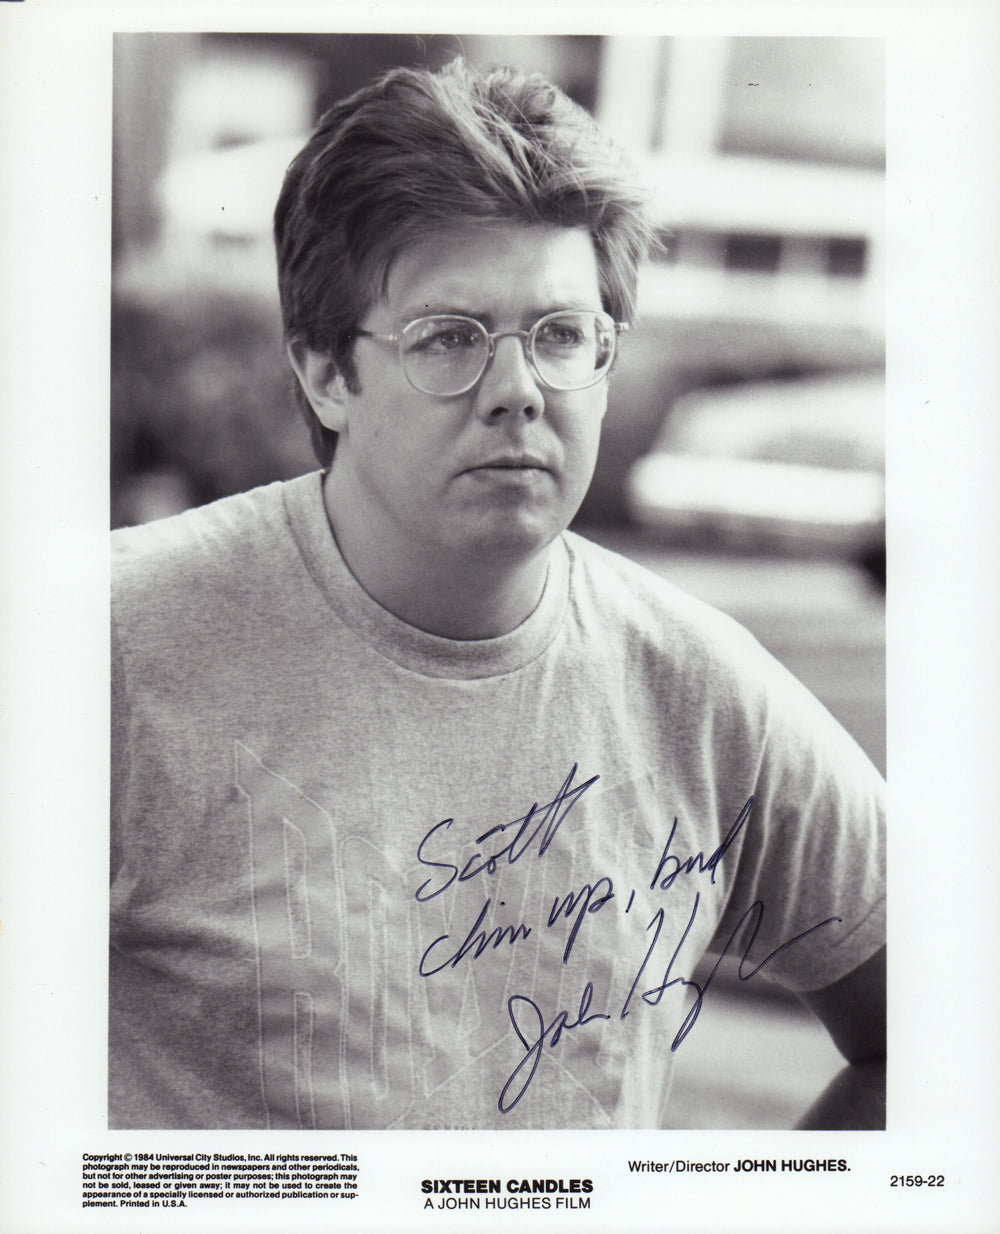 John Hughes Writer / Producer / Director of Home Alone, National Lampoon's Vacation, Breakfast Club, Ferris Bueller's Day Off, & Planes, Trains and Automobiles Signed Sixteen Candles Press Photo - 1 of  Only 7 Known to Exist